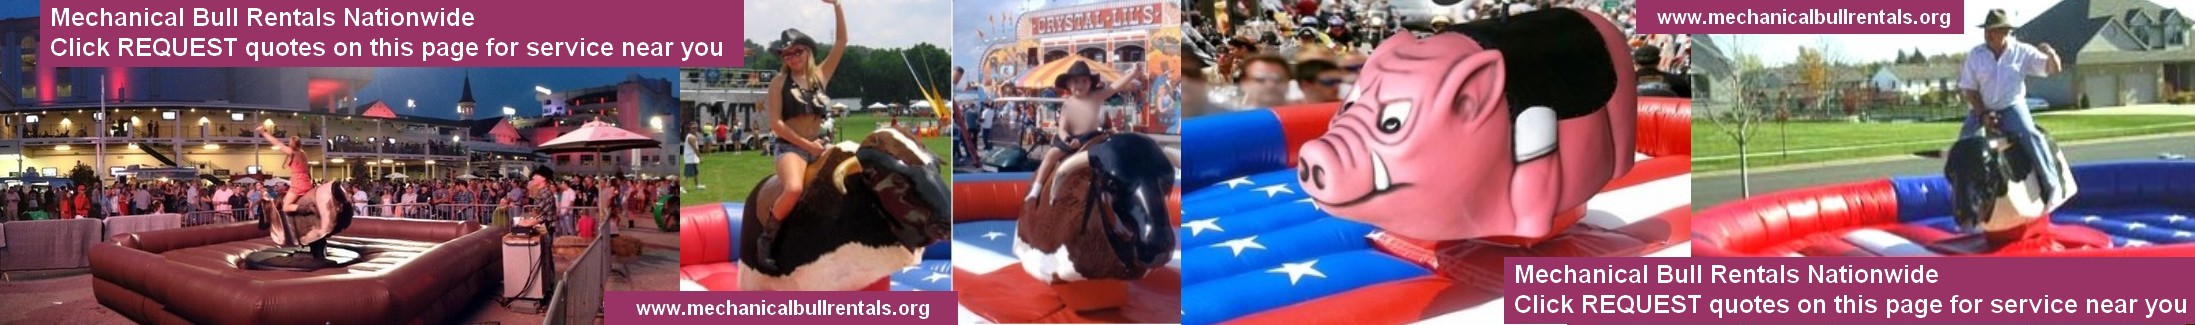 Mechanical Bull Rentals Columbus Ohio OH and near you. Free referrals to local mechanical bull companies LOGO